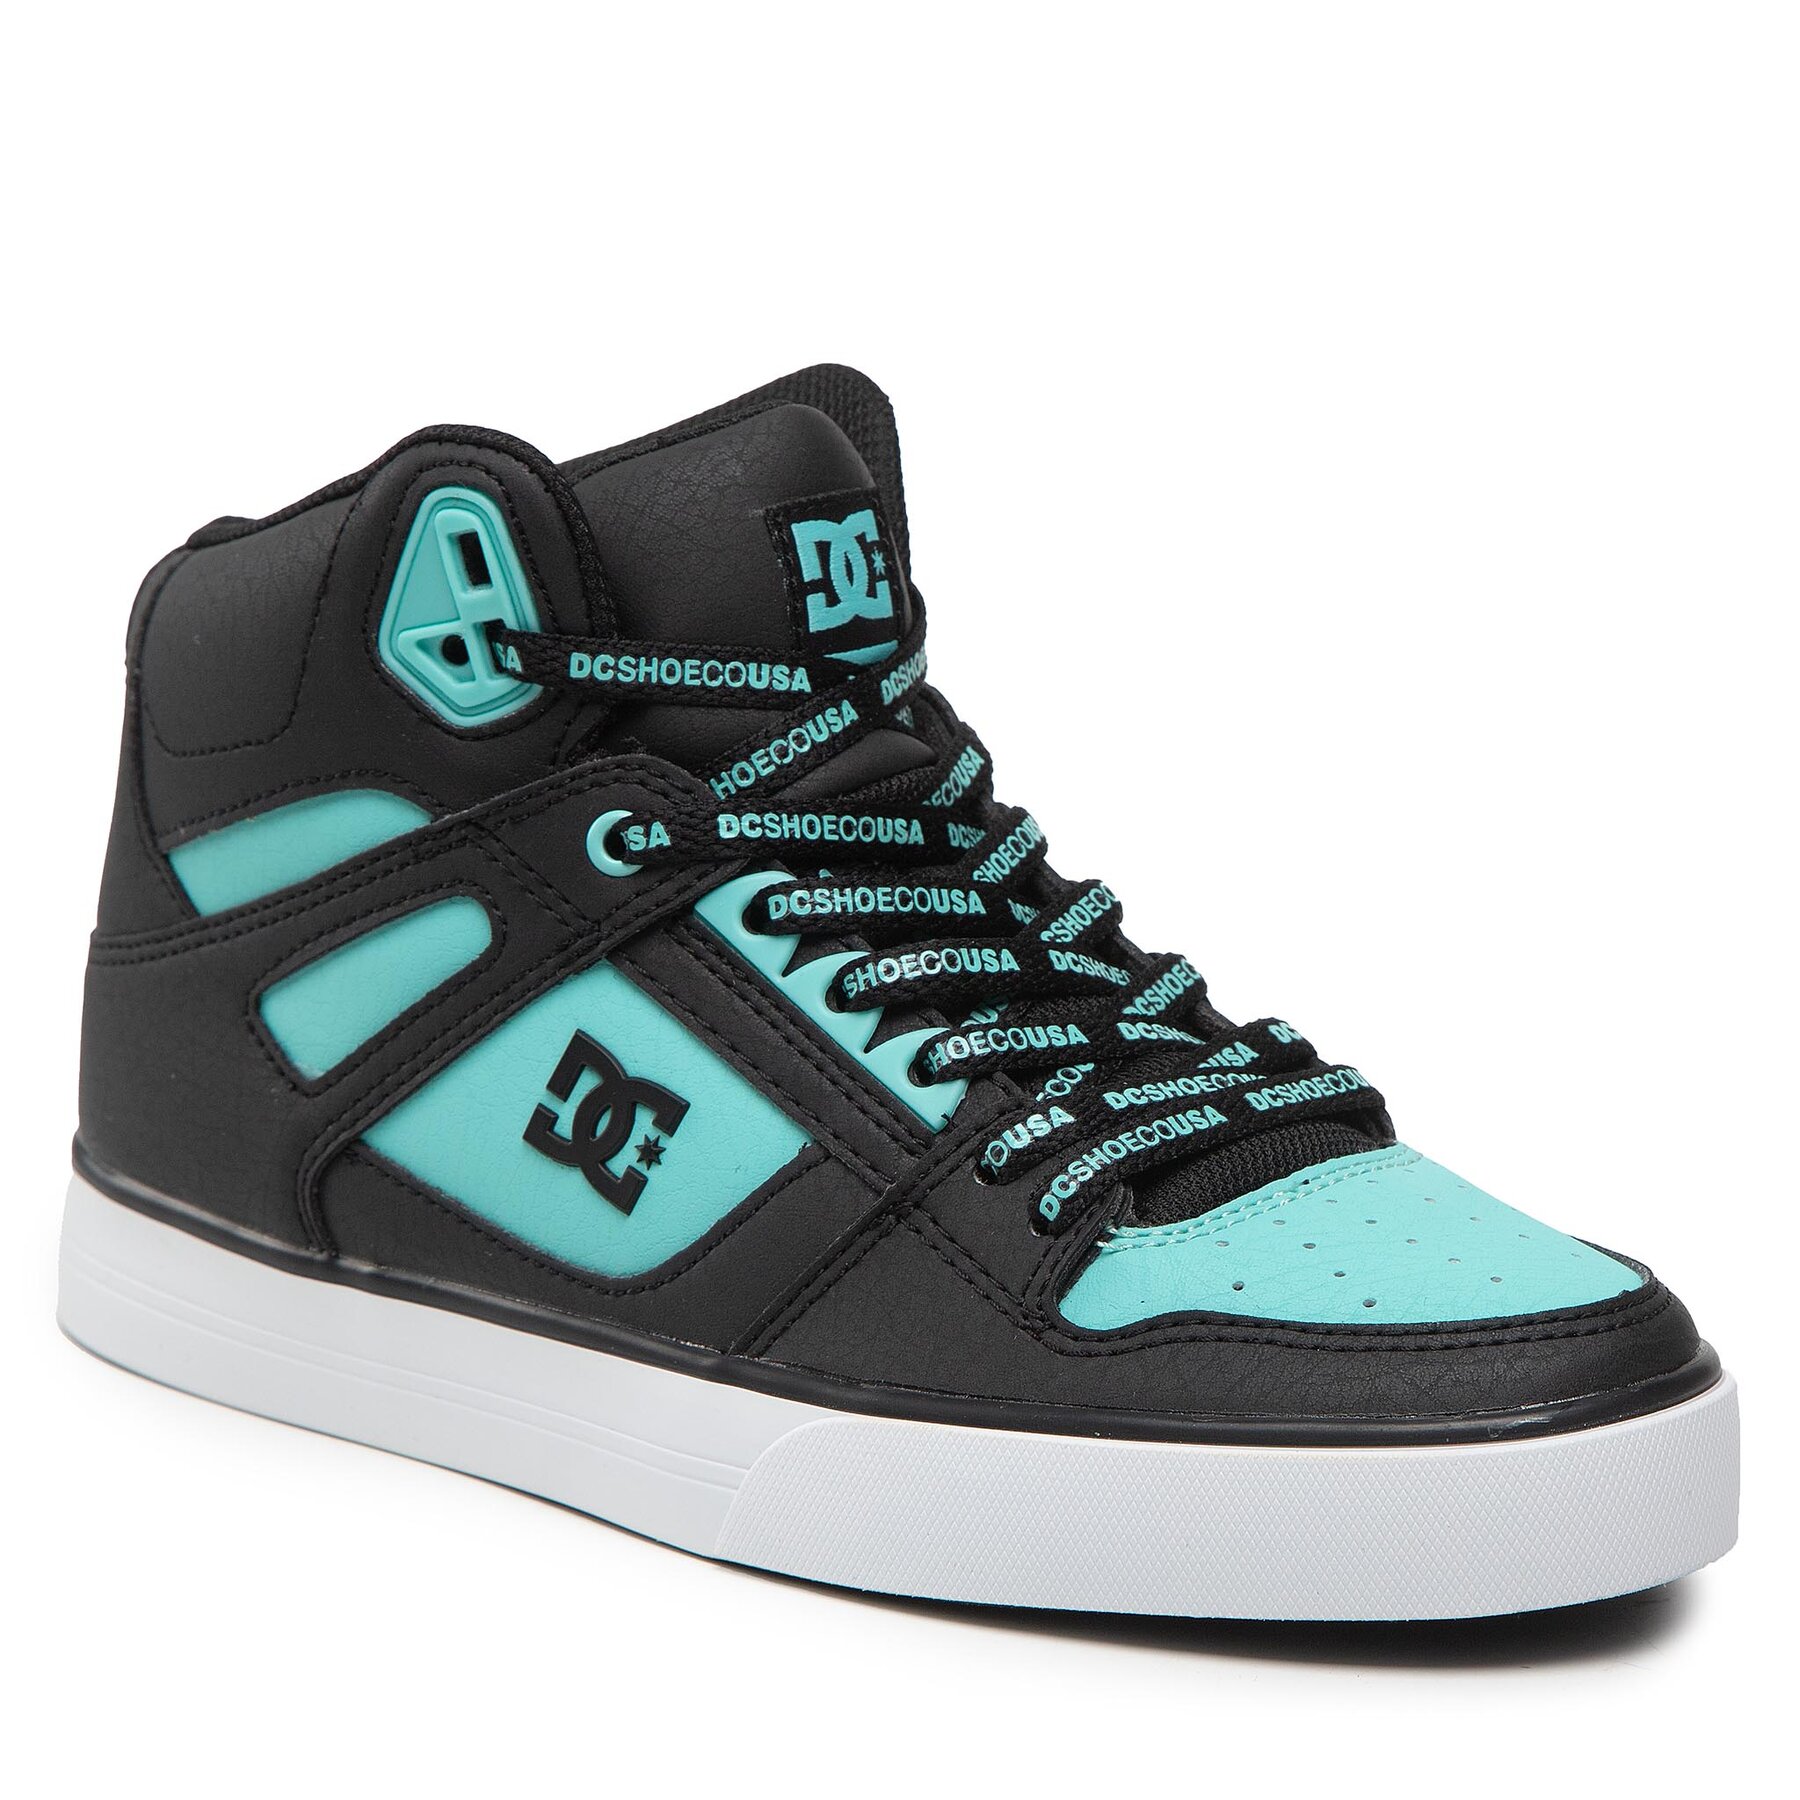 Sneakers DC Pure High-Top Wc Se Sn ADYS400093 Black/Blue Atoll(B12) ADYS400093 imagine 2022 reducere